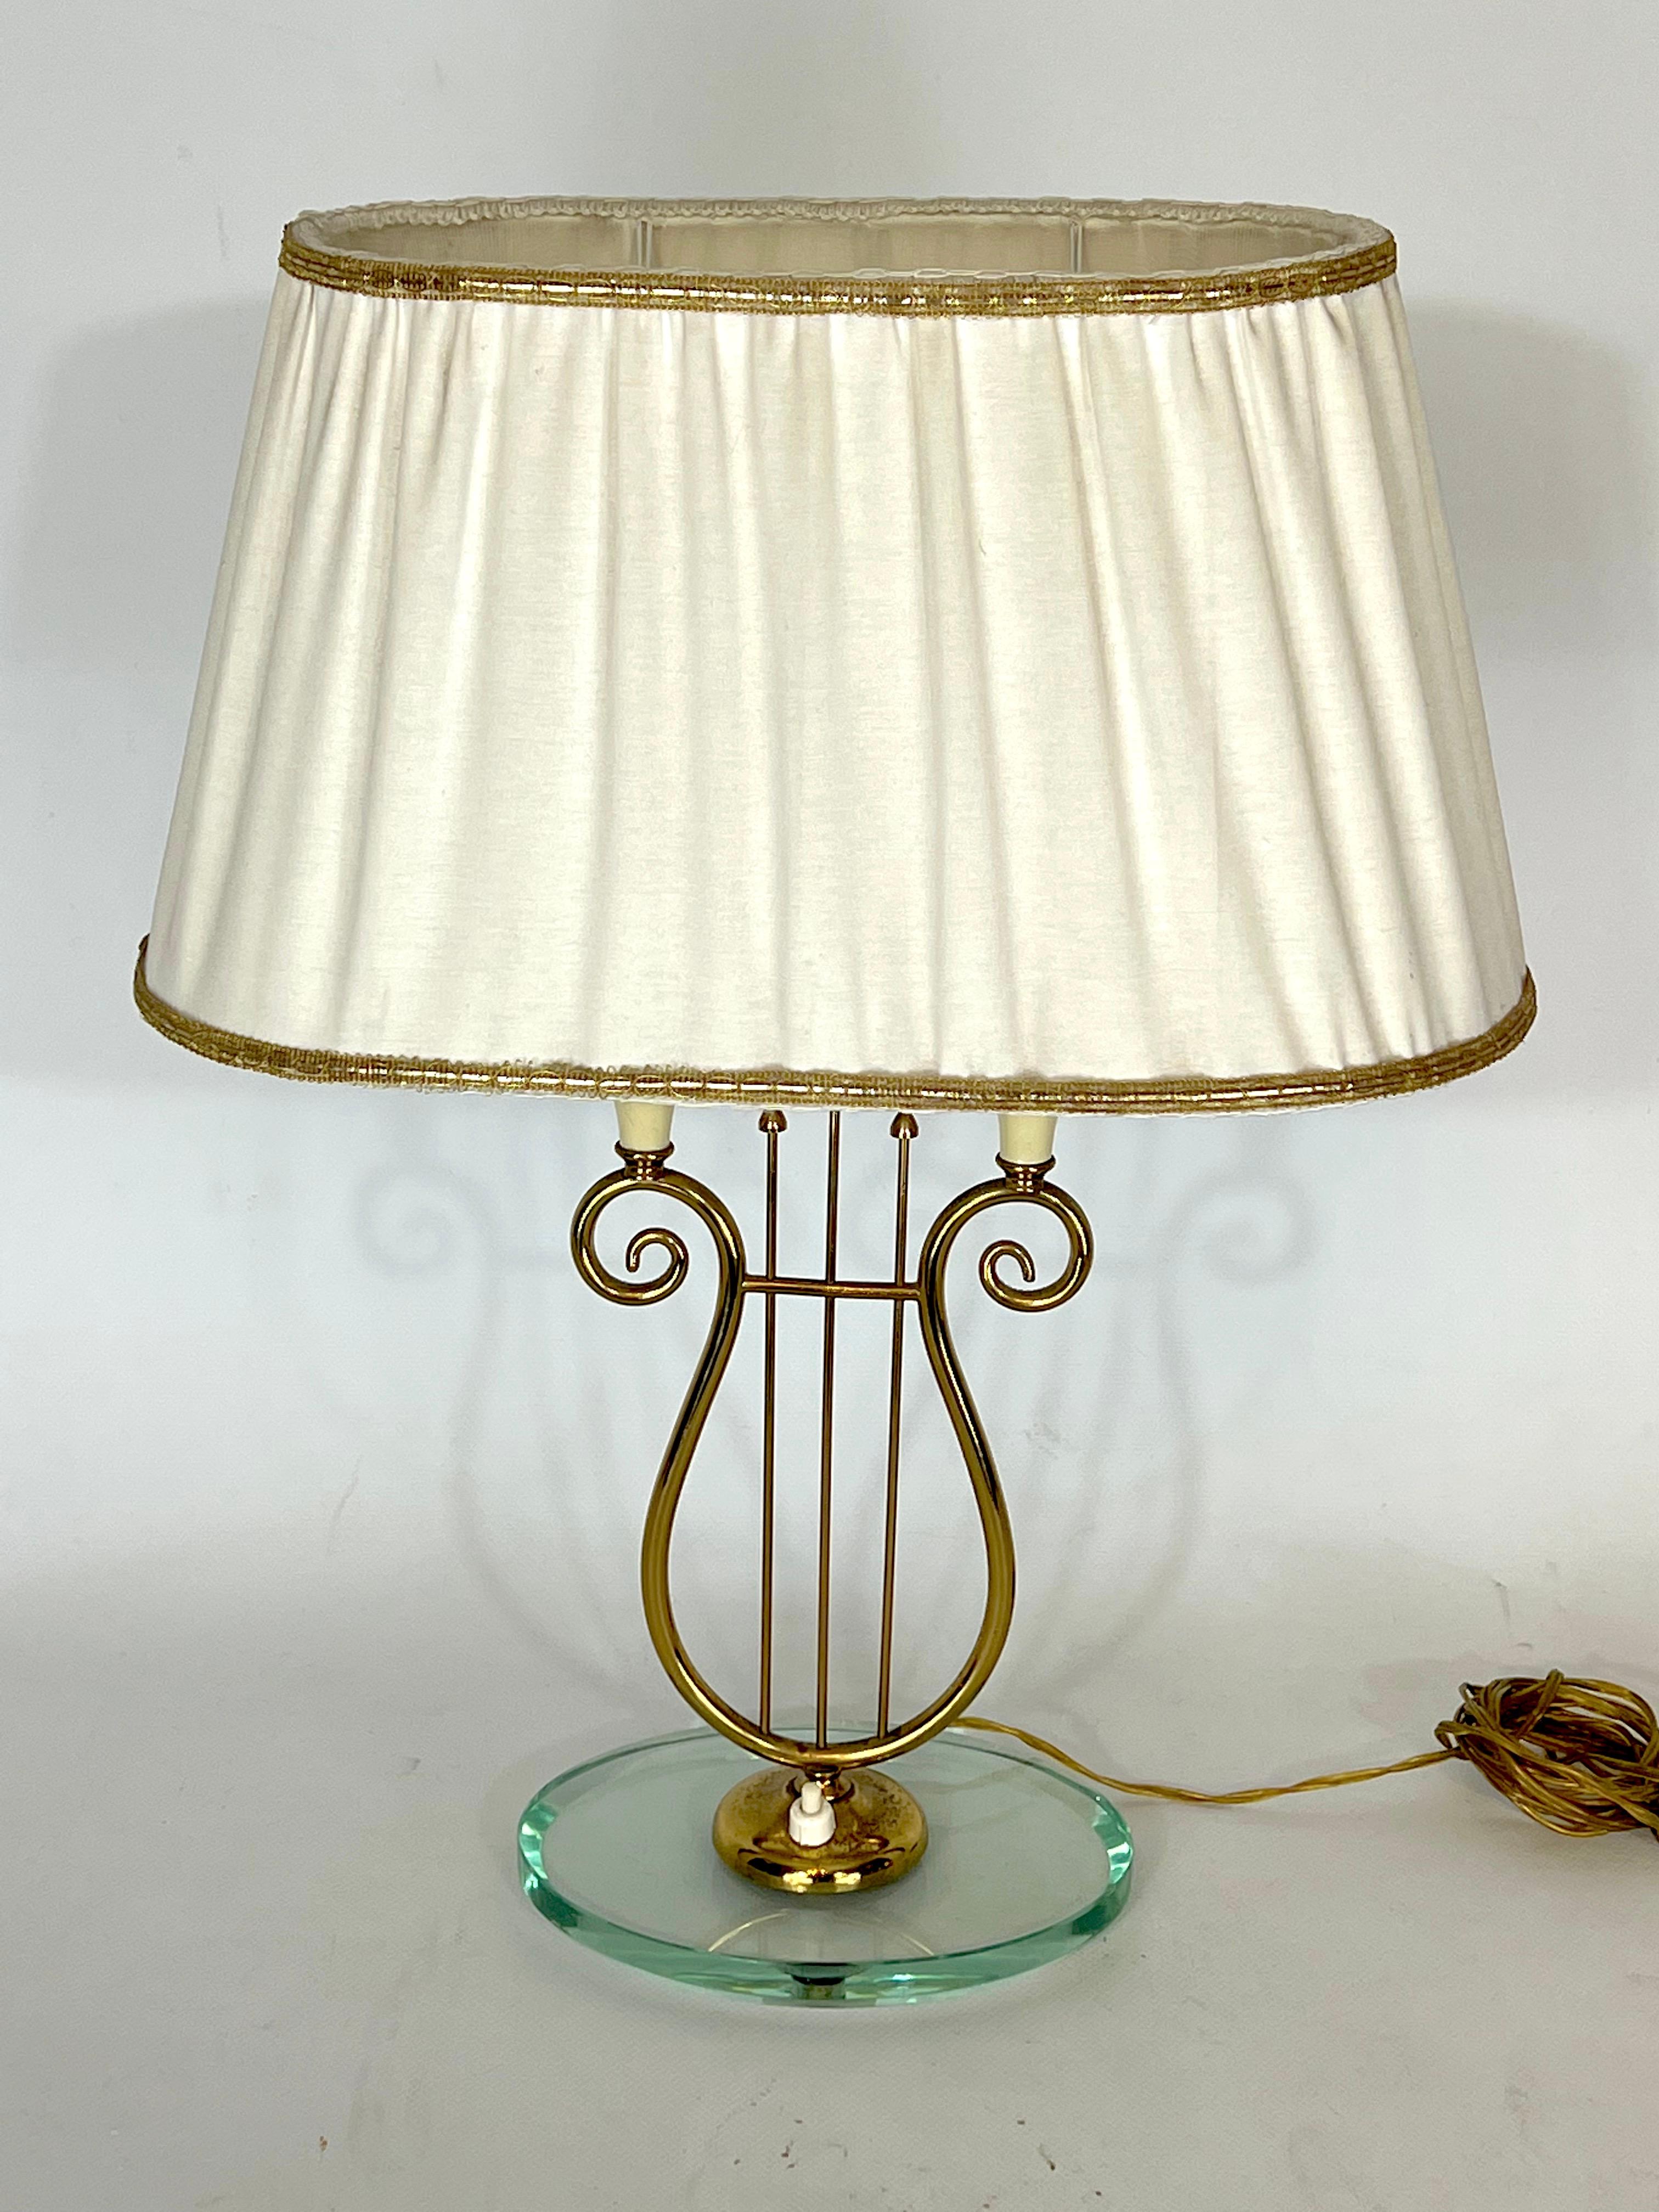 Mid-Century Modern Italian Mid-Century Brass and Glass Table Lamp from 50s